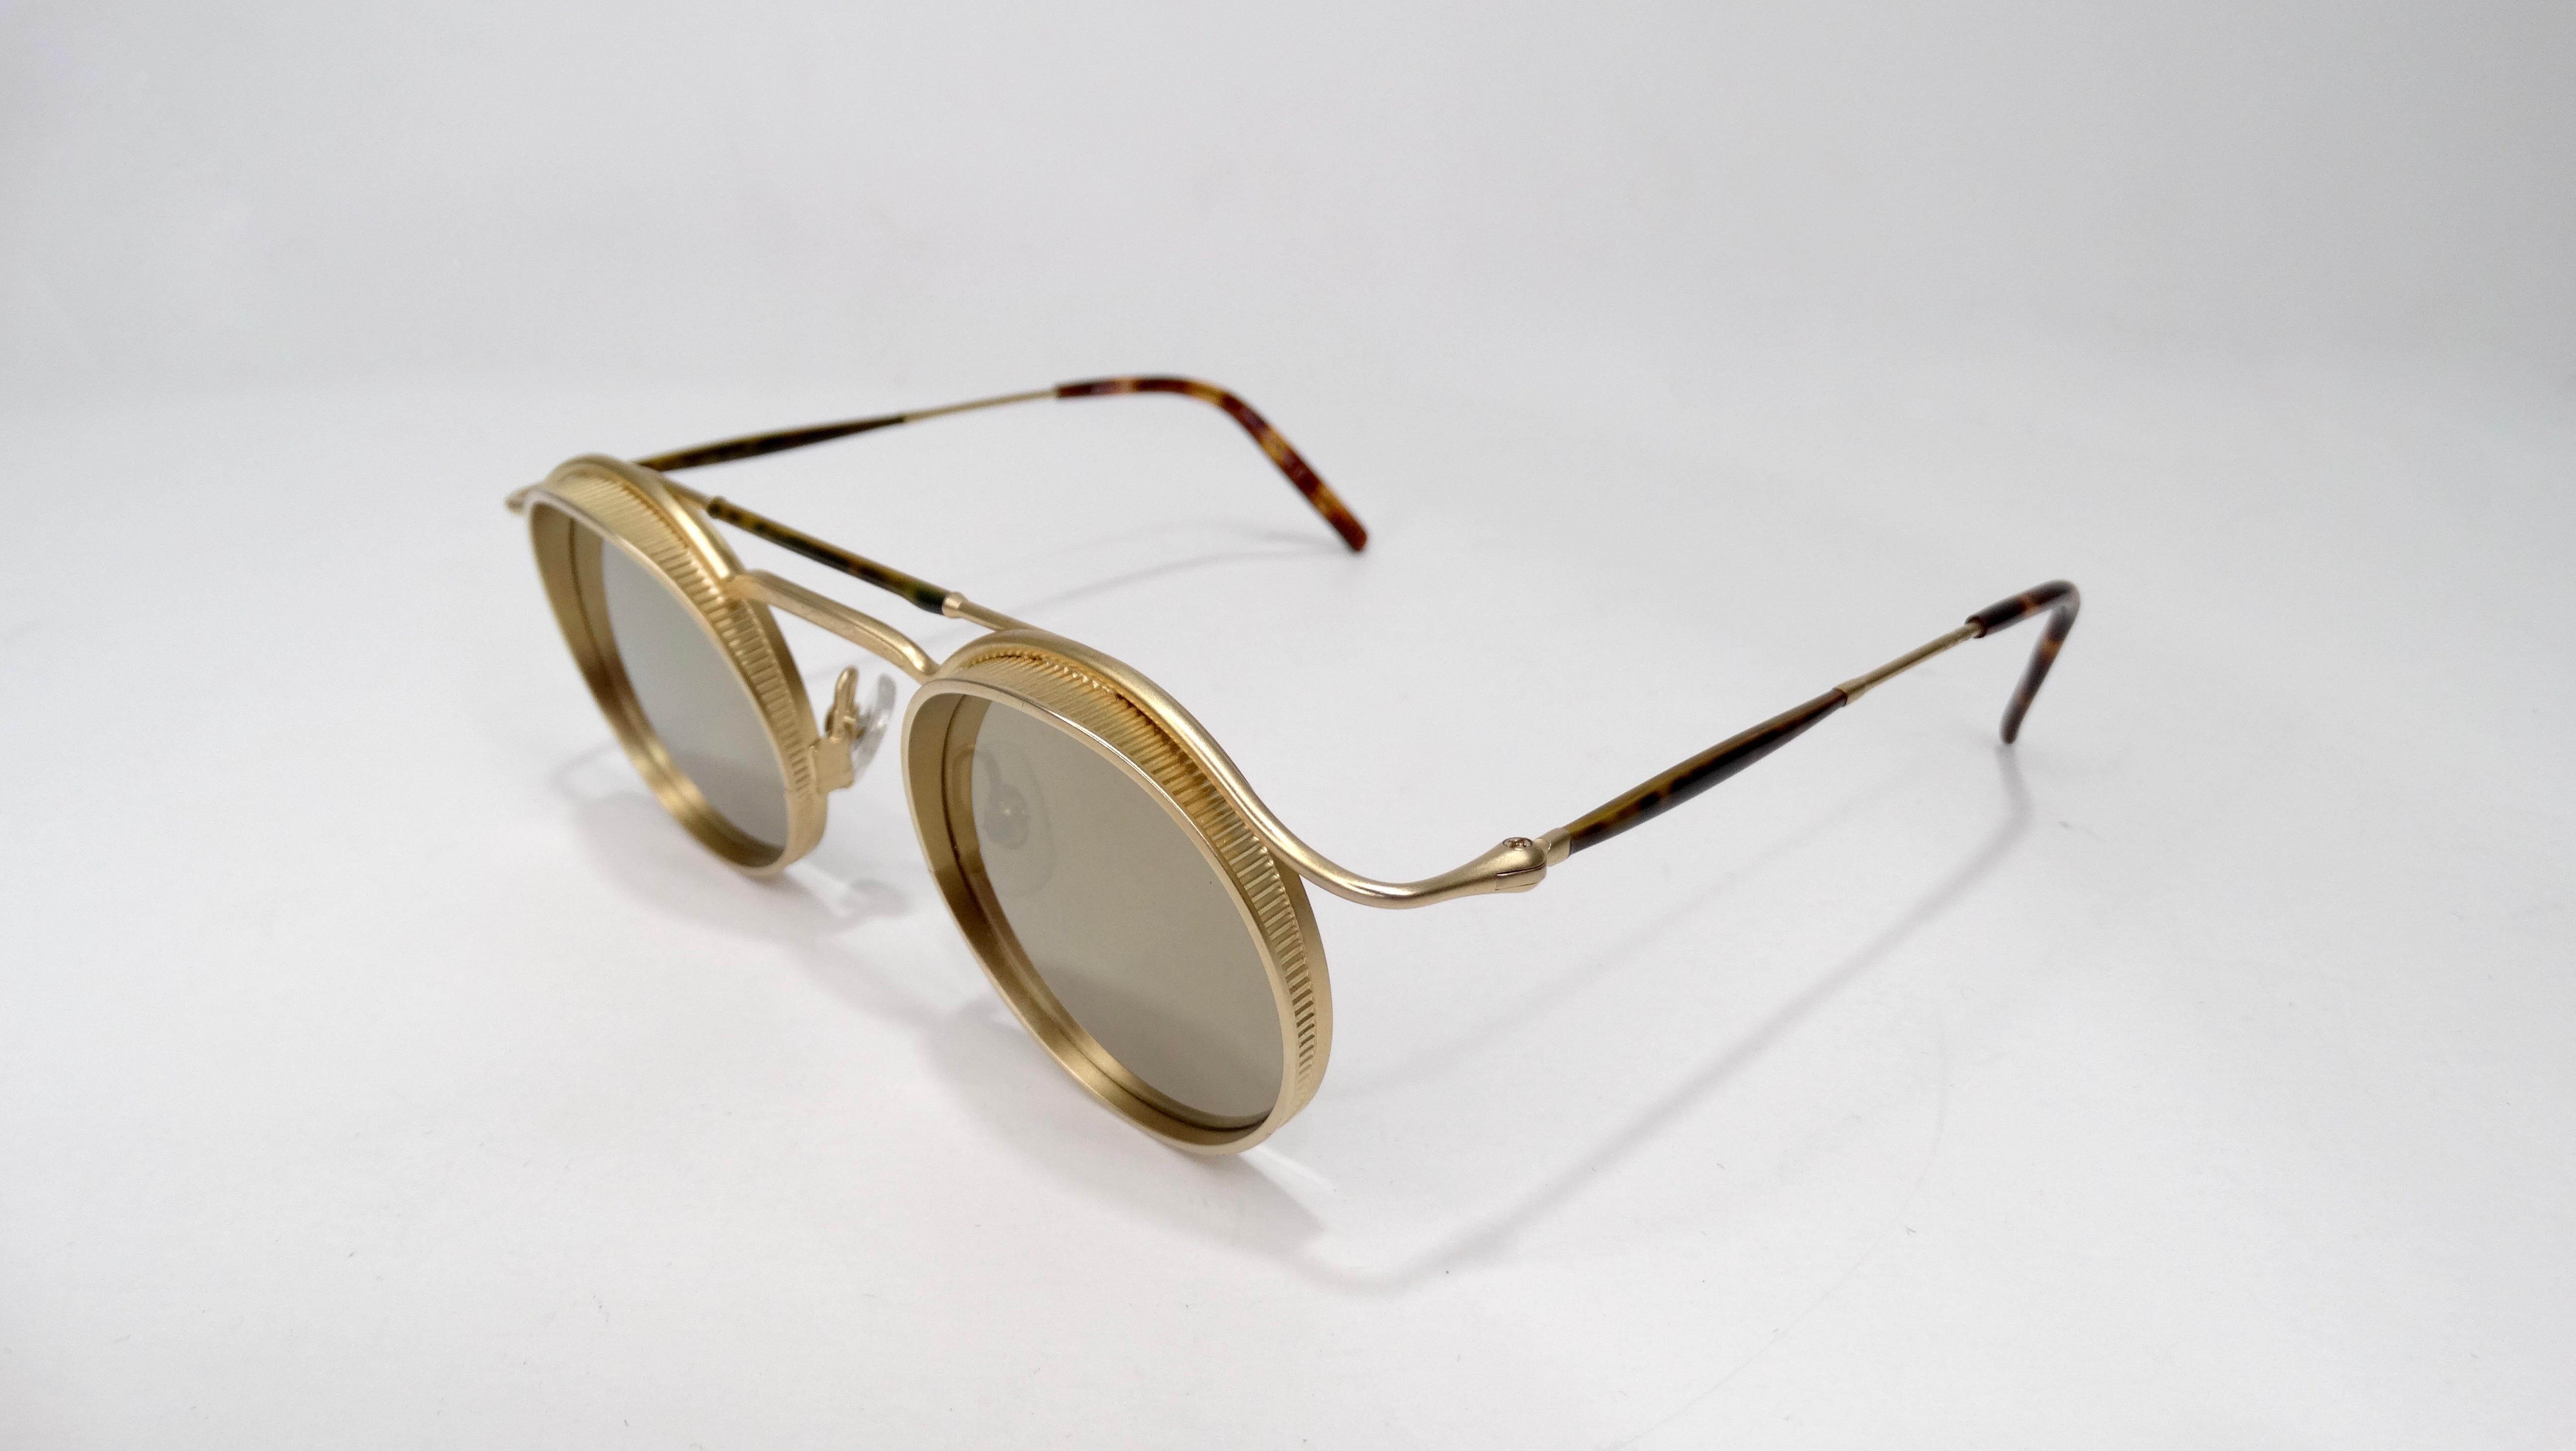 Elevate your sunglasses games with these amazing Matsuda's! Circa 1990s, these steampunk style sunglasses feature a round brushed antique gold frame with inlayed mirrored lenses. Timeless with an edge, these sunglasses look great on both males and